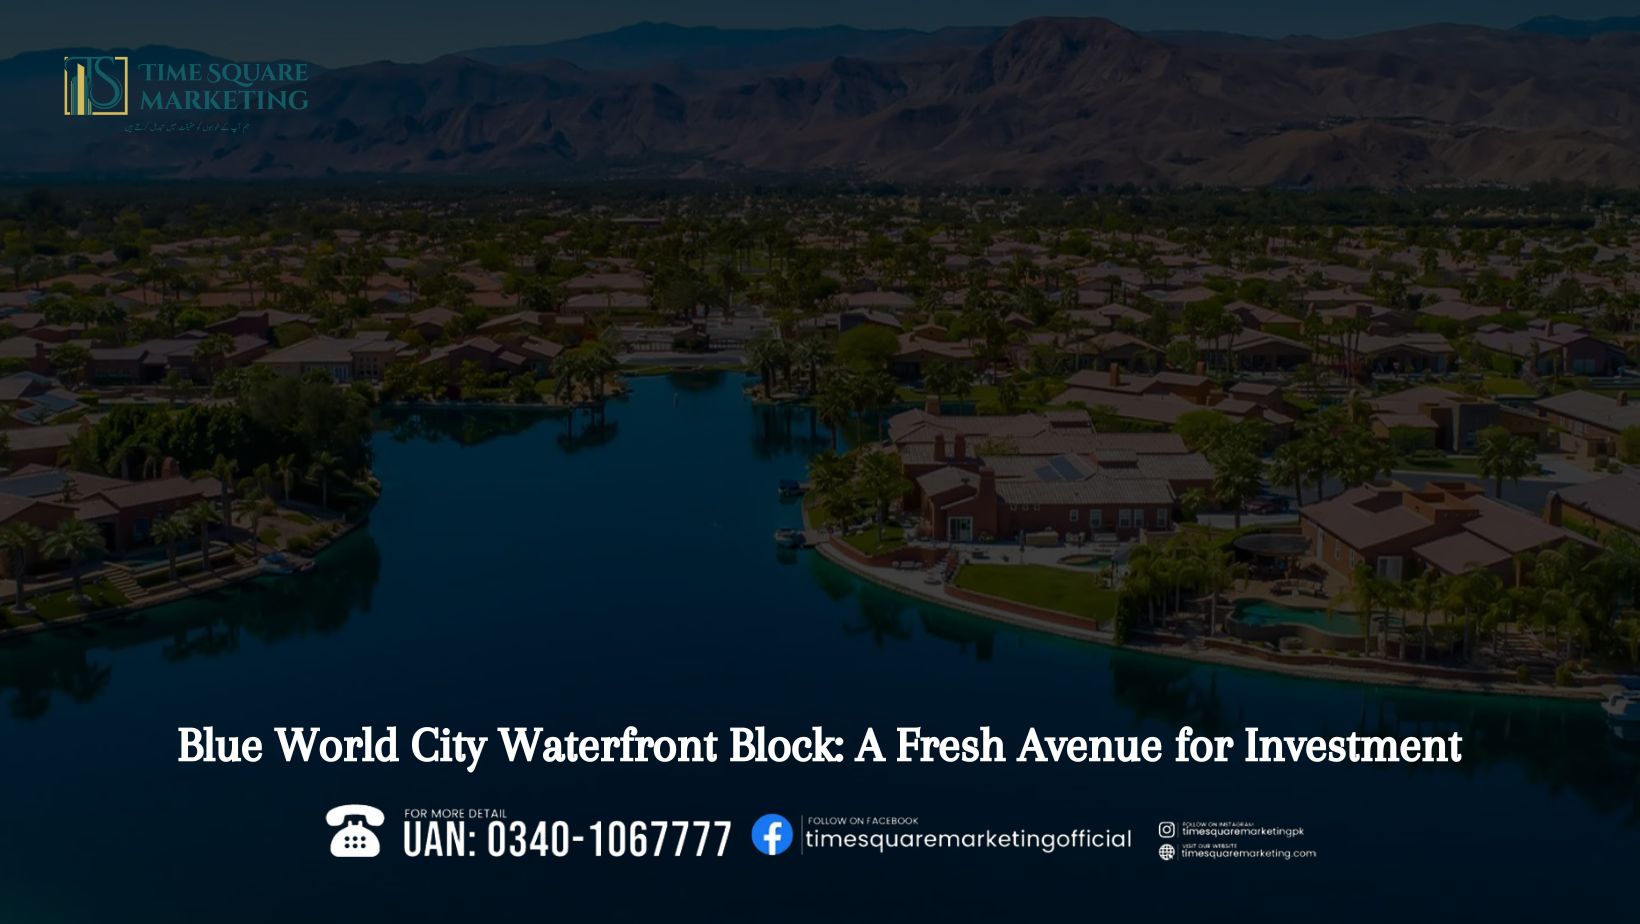 Blue World City Waterfront Block A Fresh Avenue for Investment